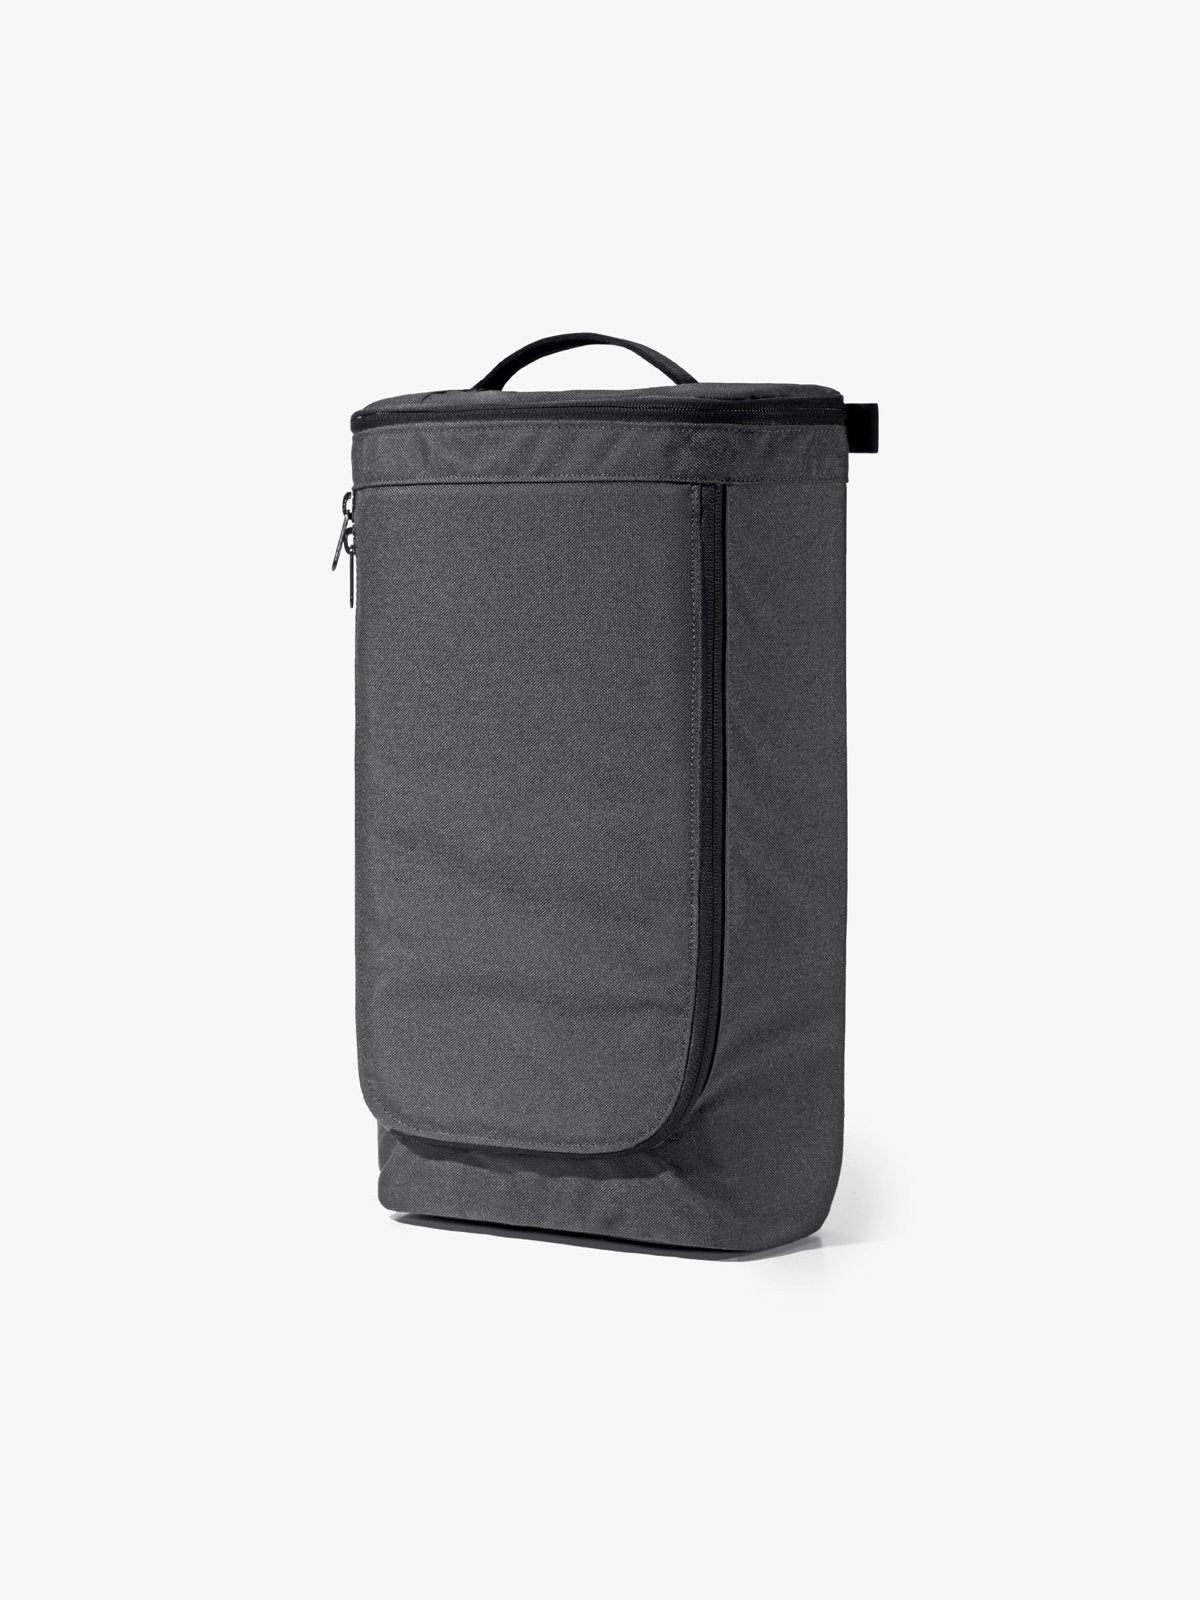 Capsule by Mission Workshop - Weatherproof Bags & Technical Apparel - San Francisco & Los Angeles - Built to endure - Guaranteed forever